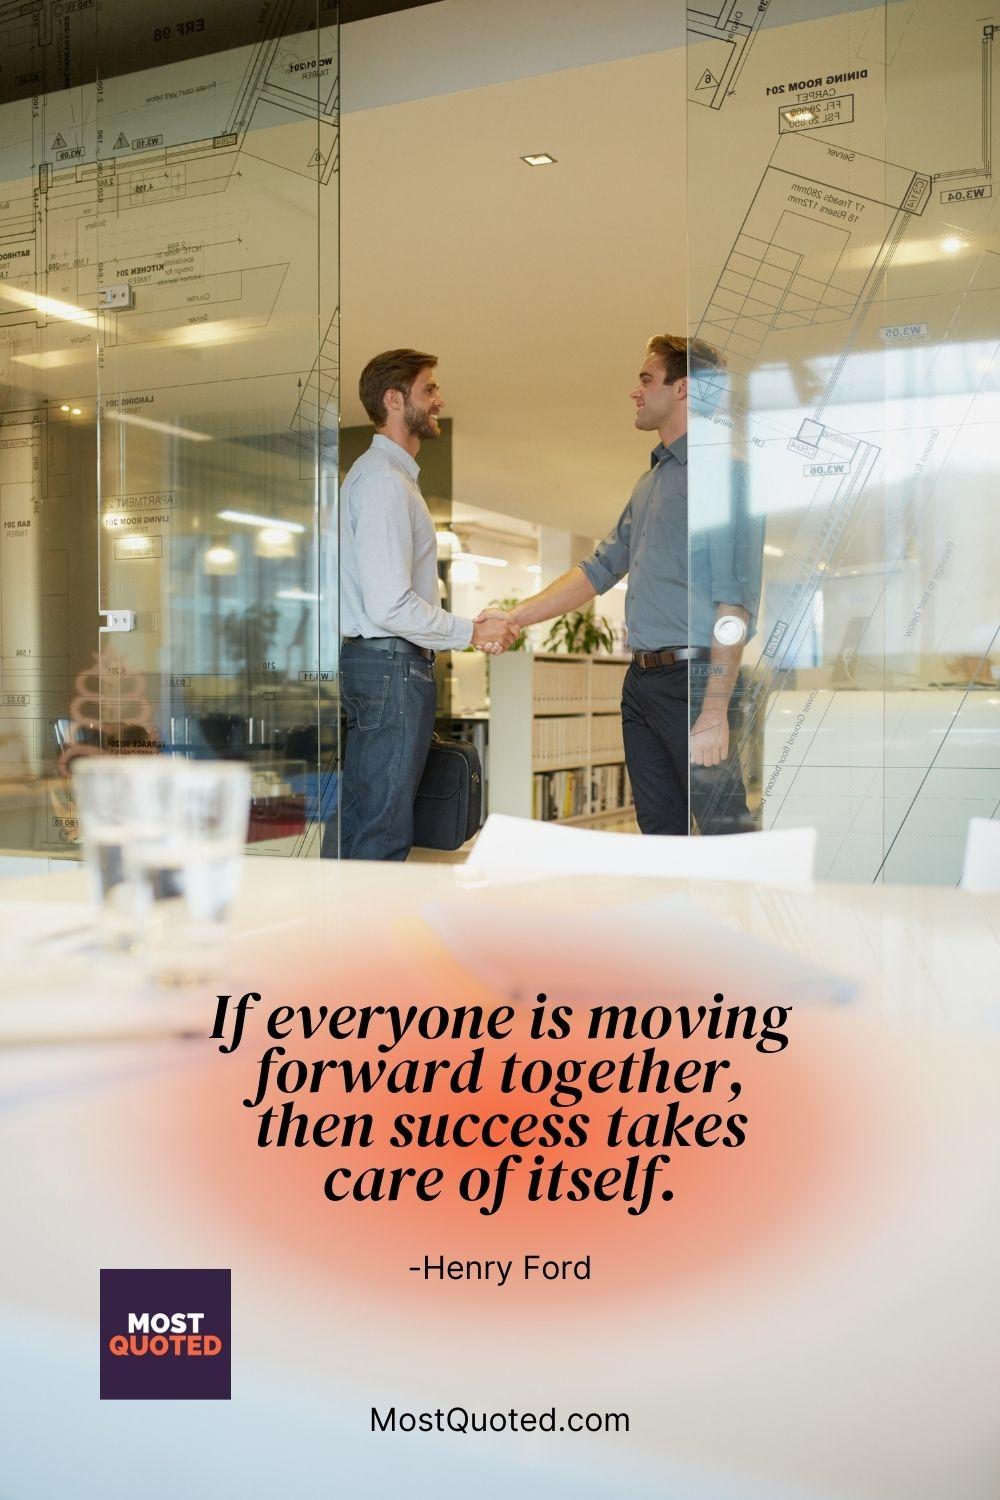 If everyone is moving forward together, then success takes care of itself. - Henry Ford